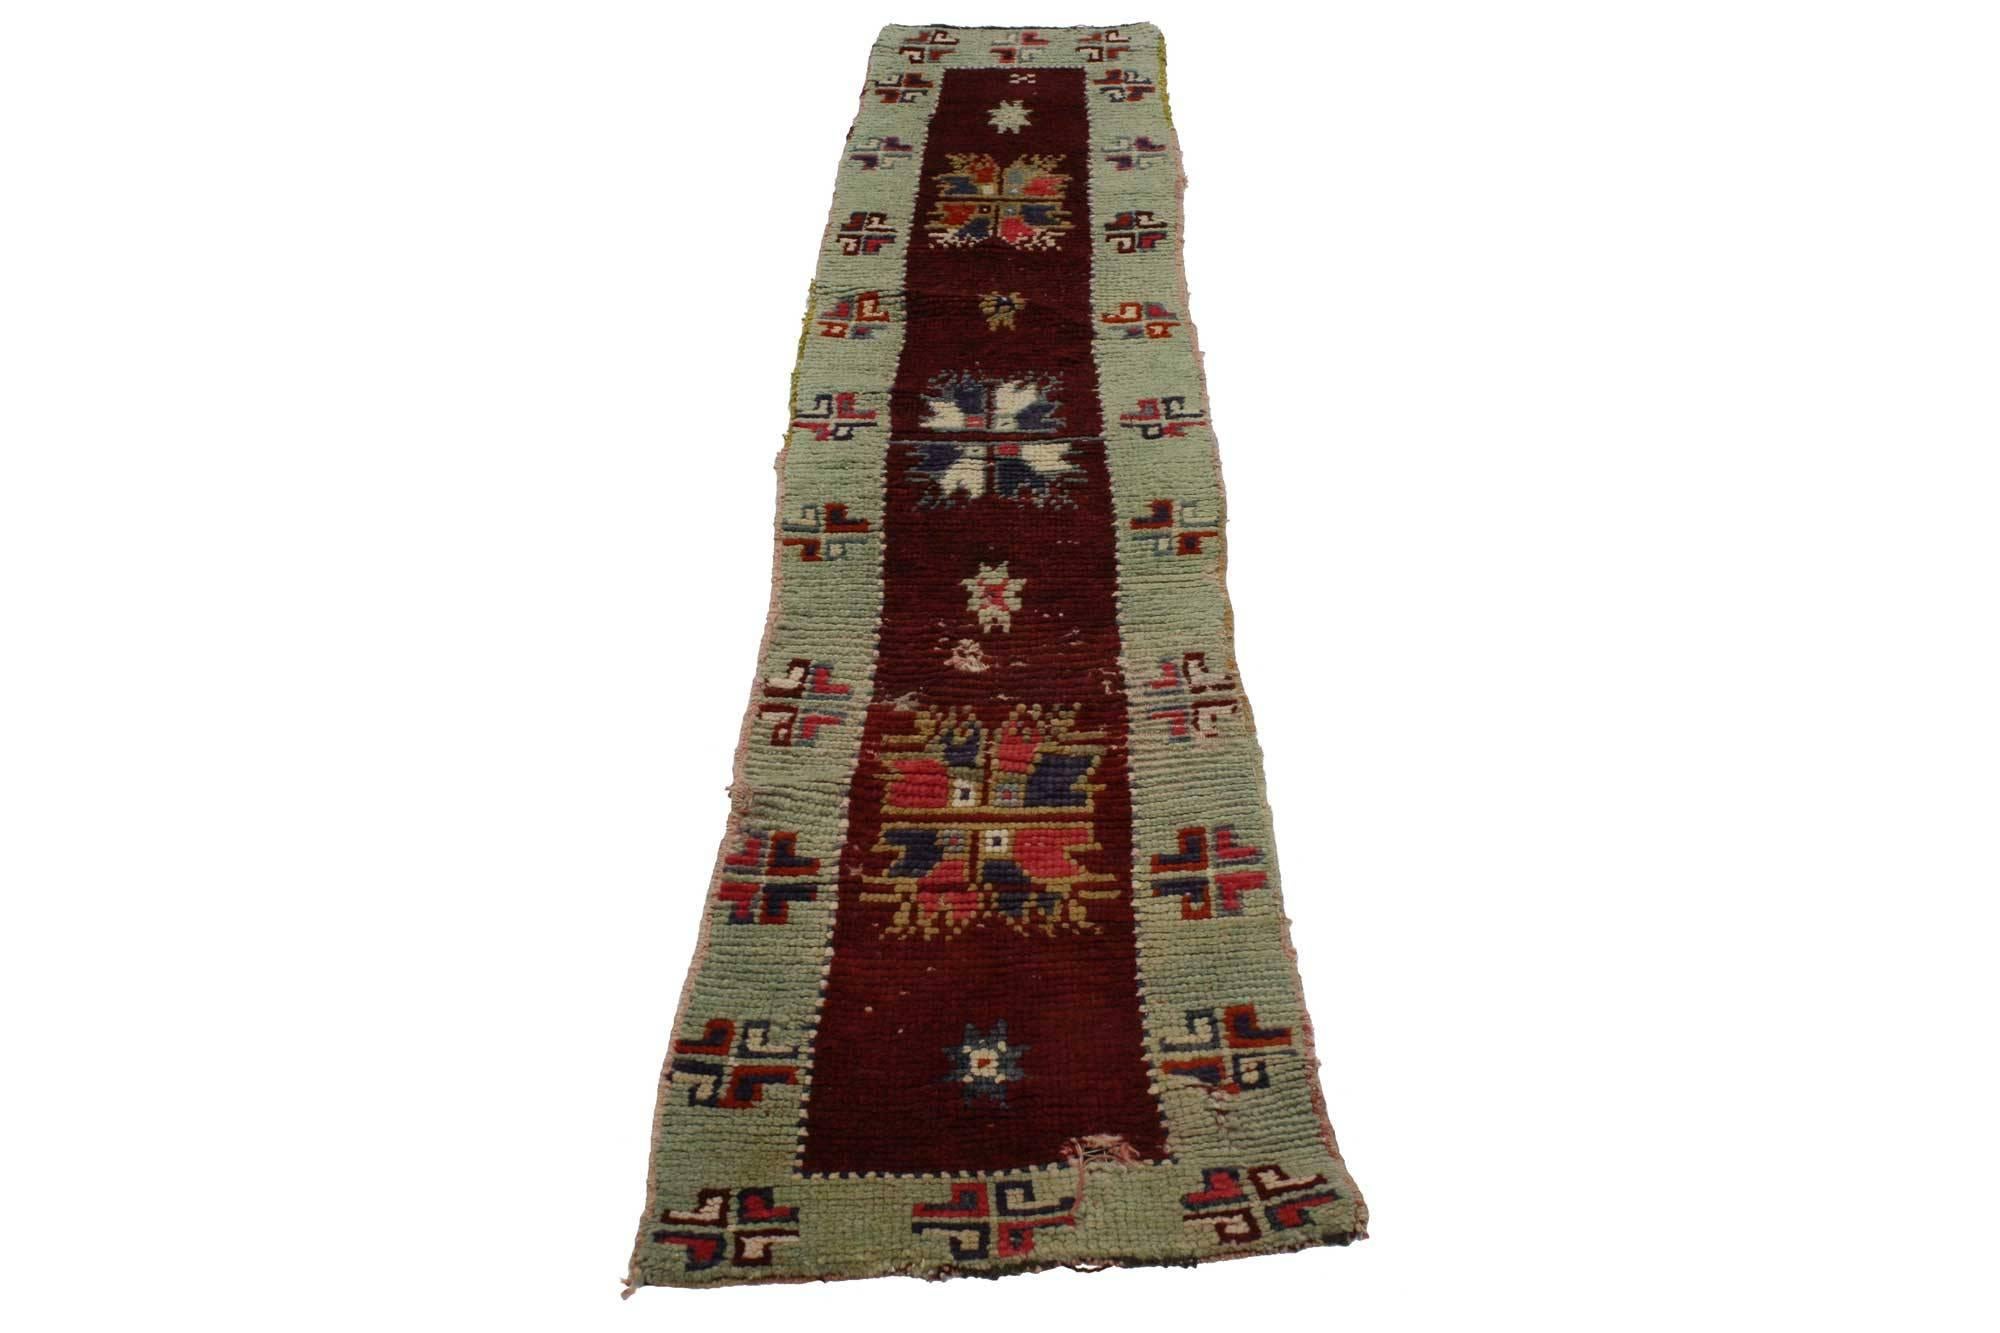 51722, Oushak runner with Farmhouse style. Charming and alluring, this Oushak runner will delight guests to your farmhouse style home in a hallway, entryway, bedroom, or galley kitchen. A deep burgundy, maroon, and wine red field anchors the runner